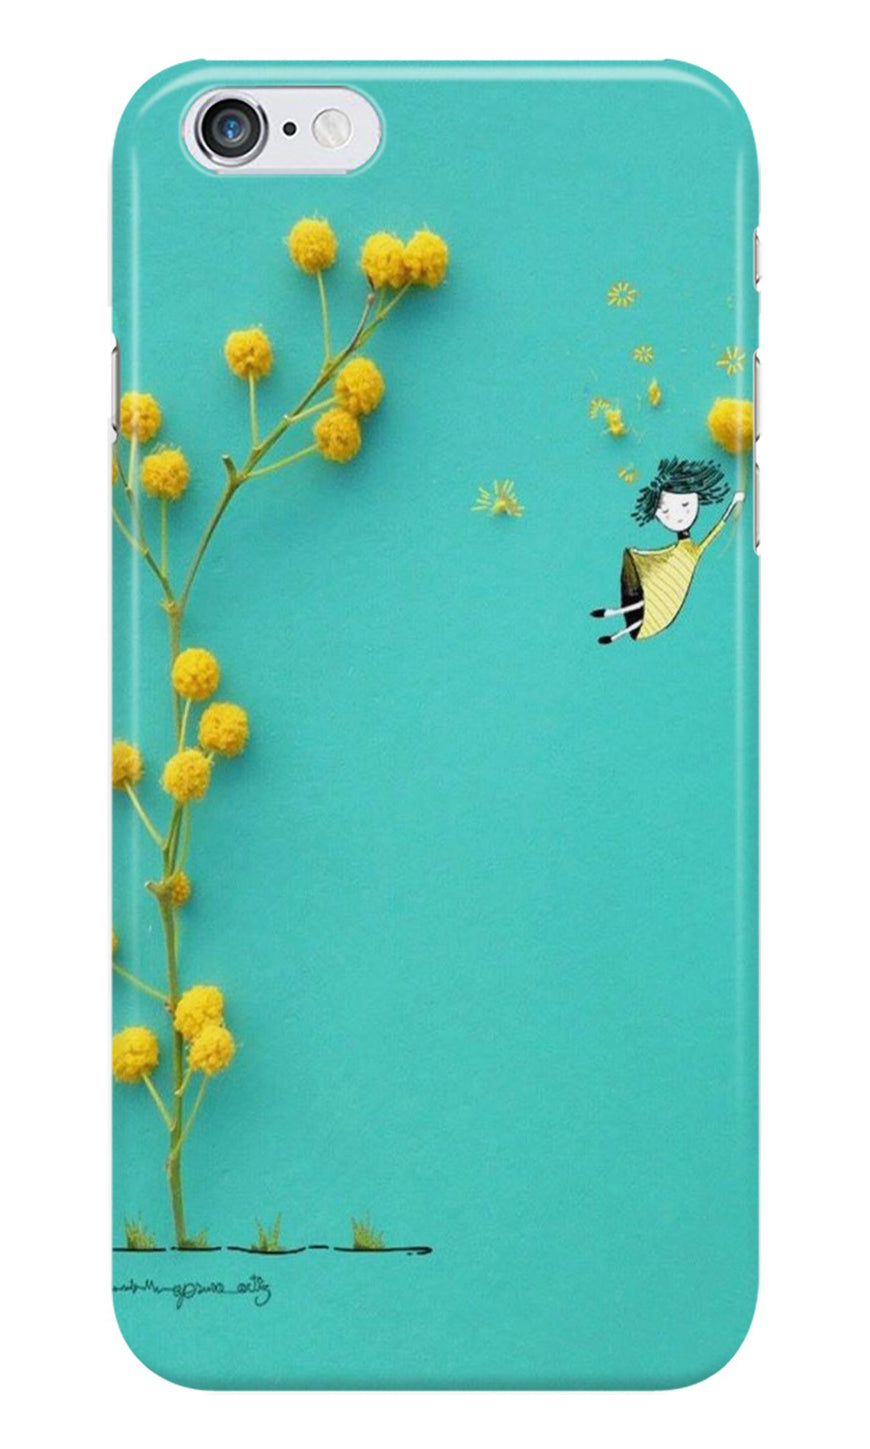 Flowers Girl Case for Iphone 6/6S (Design No. 216)